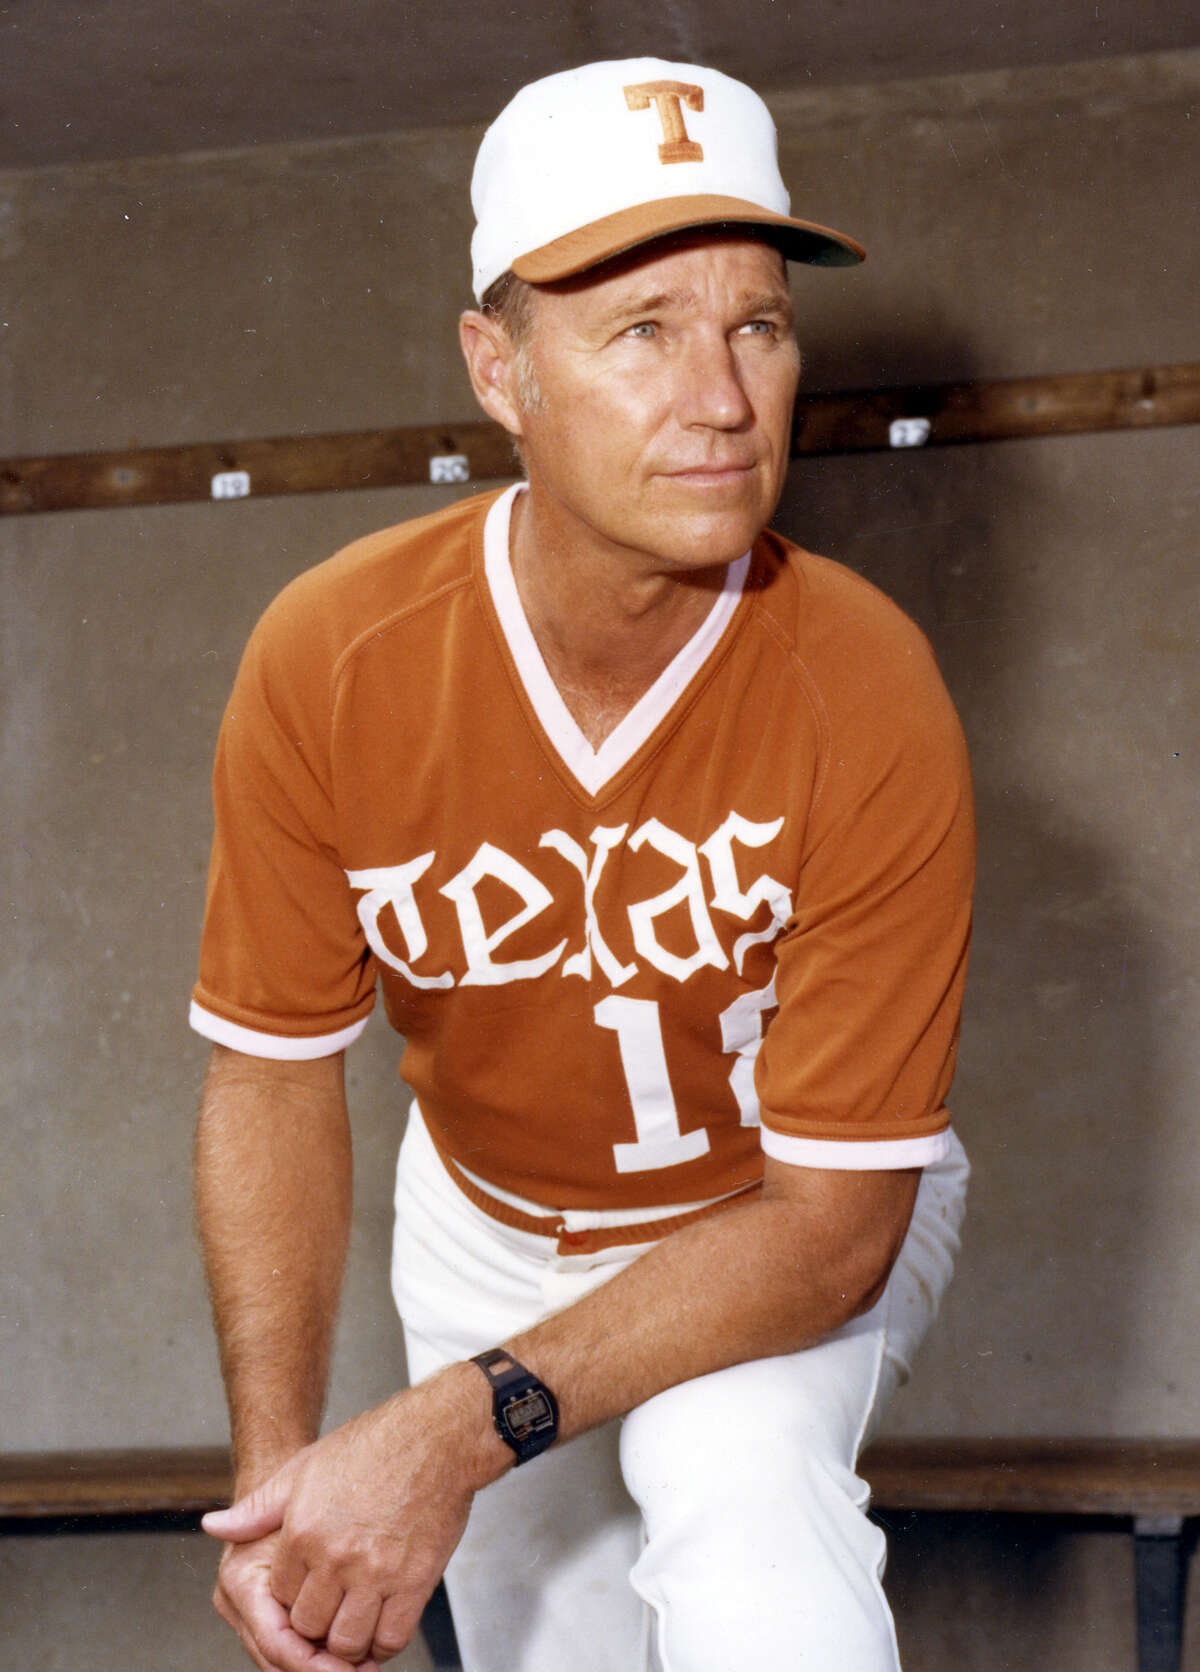 Cliff Gustafson, who died Monday at age 91, won two national titles at Texas.